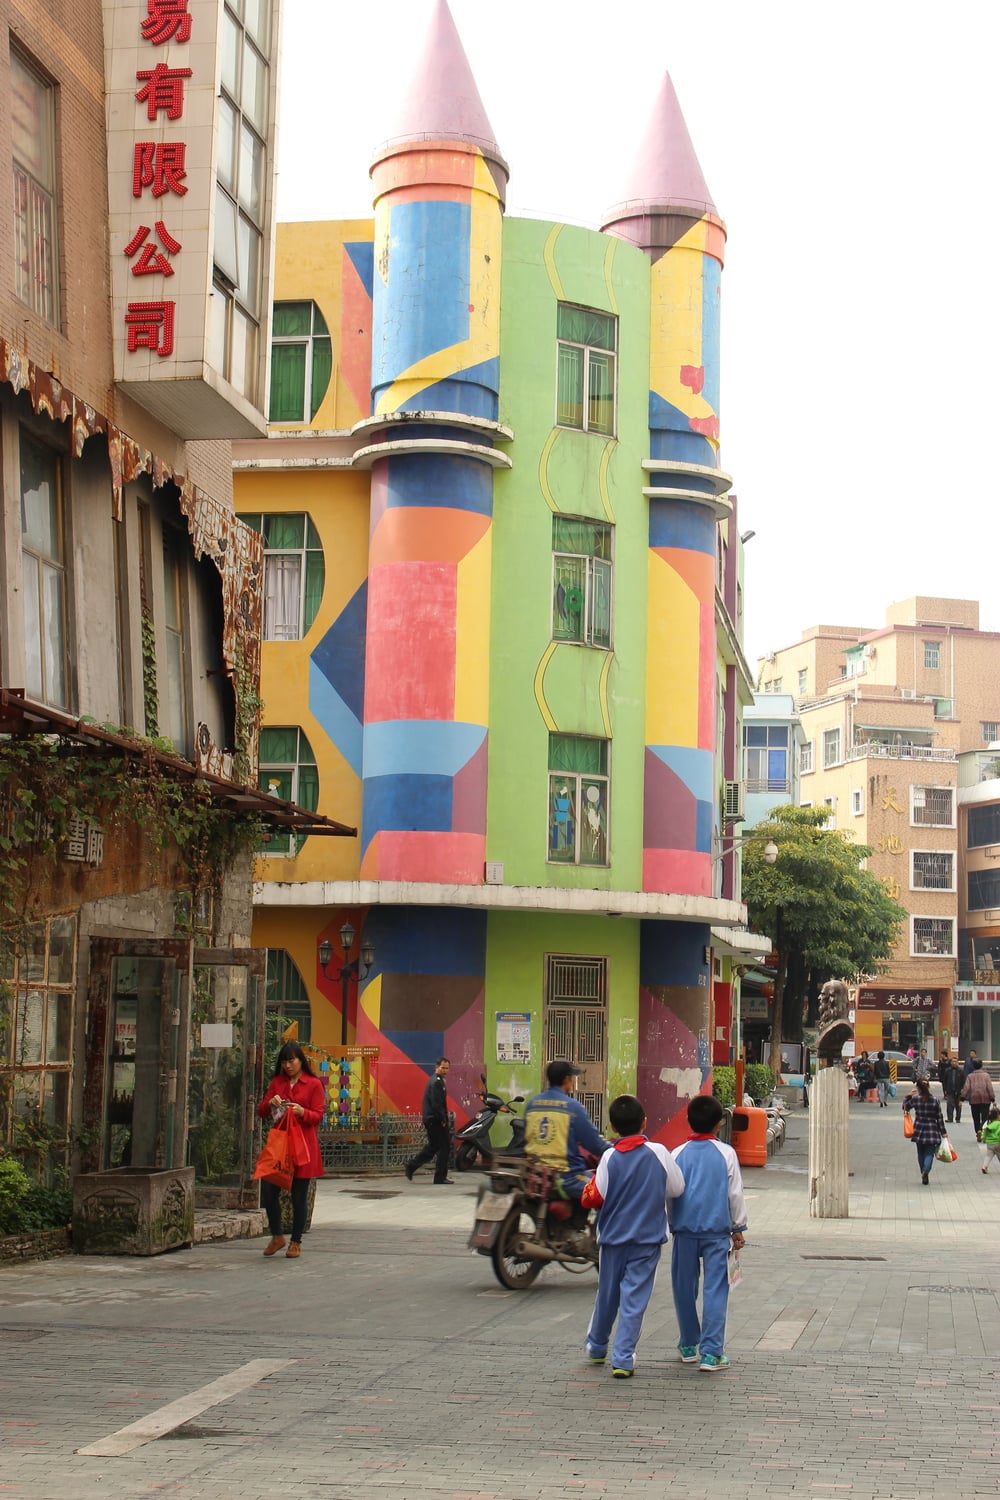  We were told that this colorful castle is a kindergarten!&nbsp; 